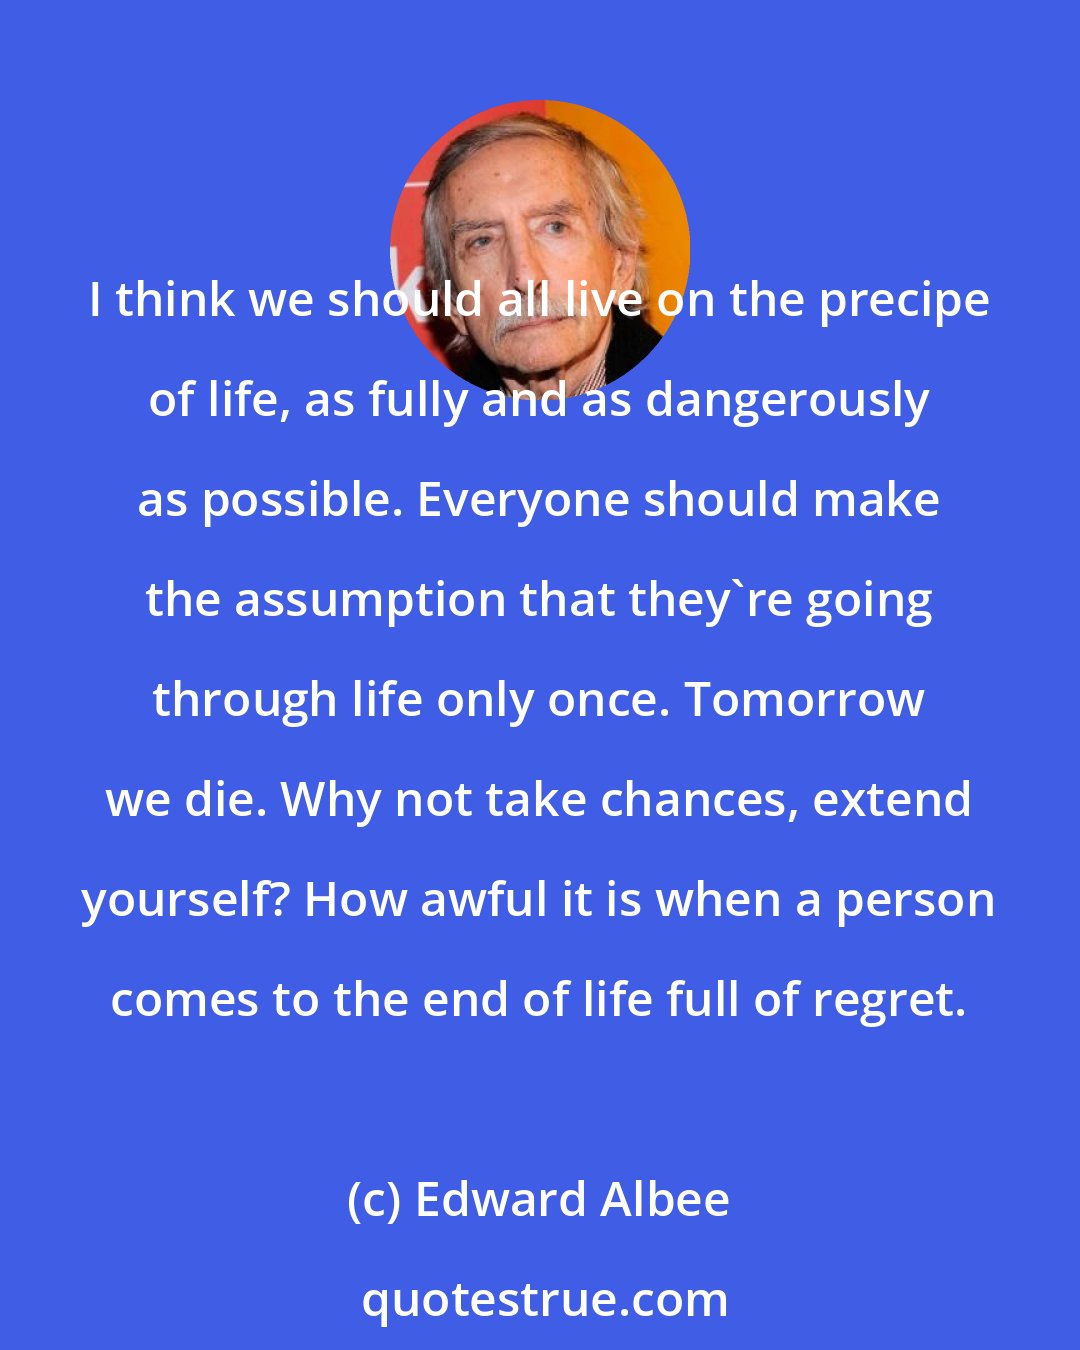 Edward Albee: I think we should all live on the precipe of life, as fully and as dangerously as possible. Everyone should make the assumption that they're going through life only once. Tomorrow we die. Why not take chances, extend yourself? How awful it is when a person comes to the end of life full of regret.